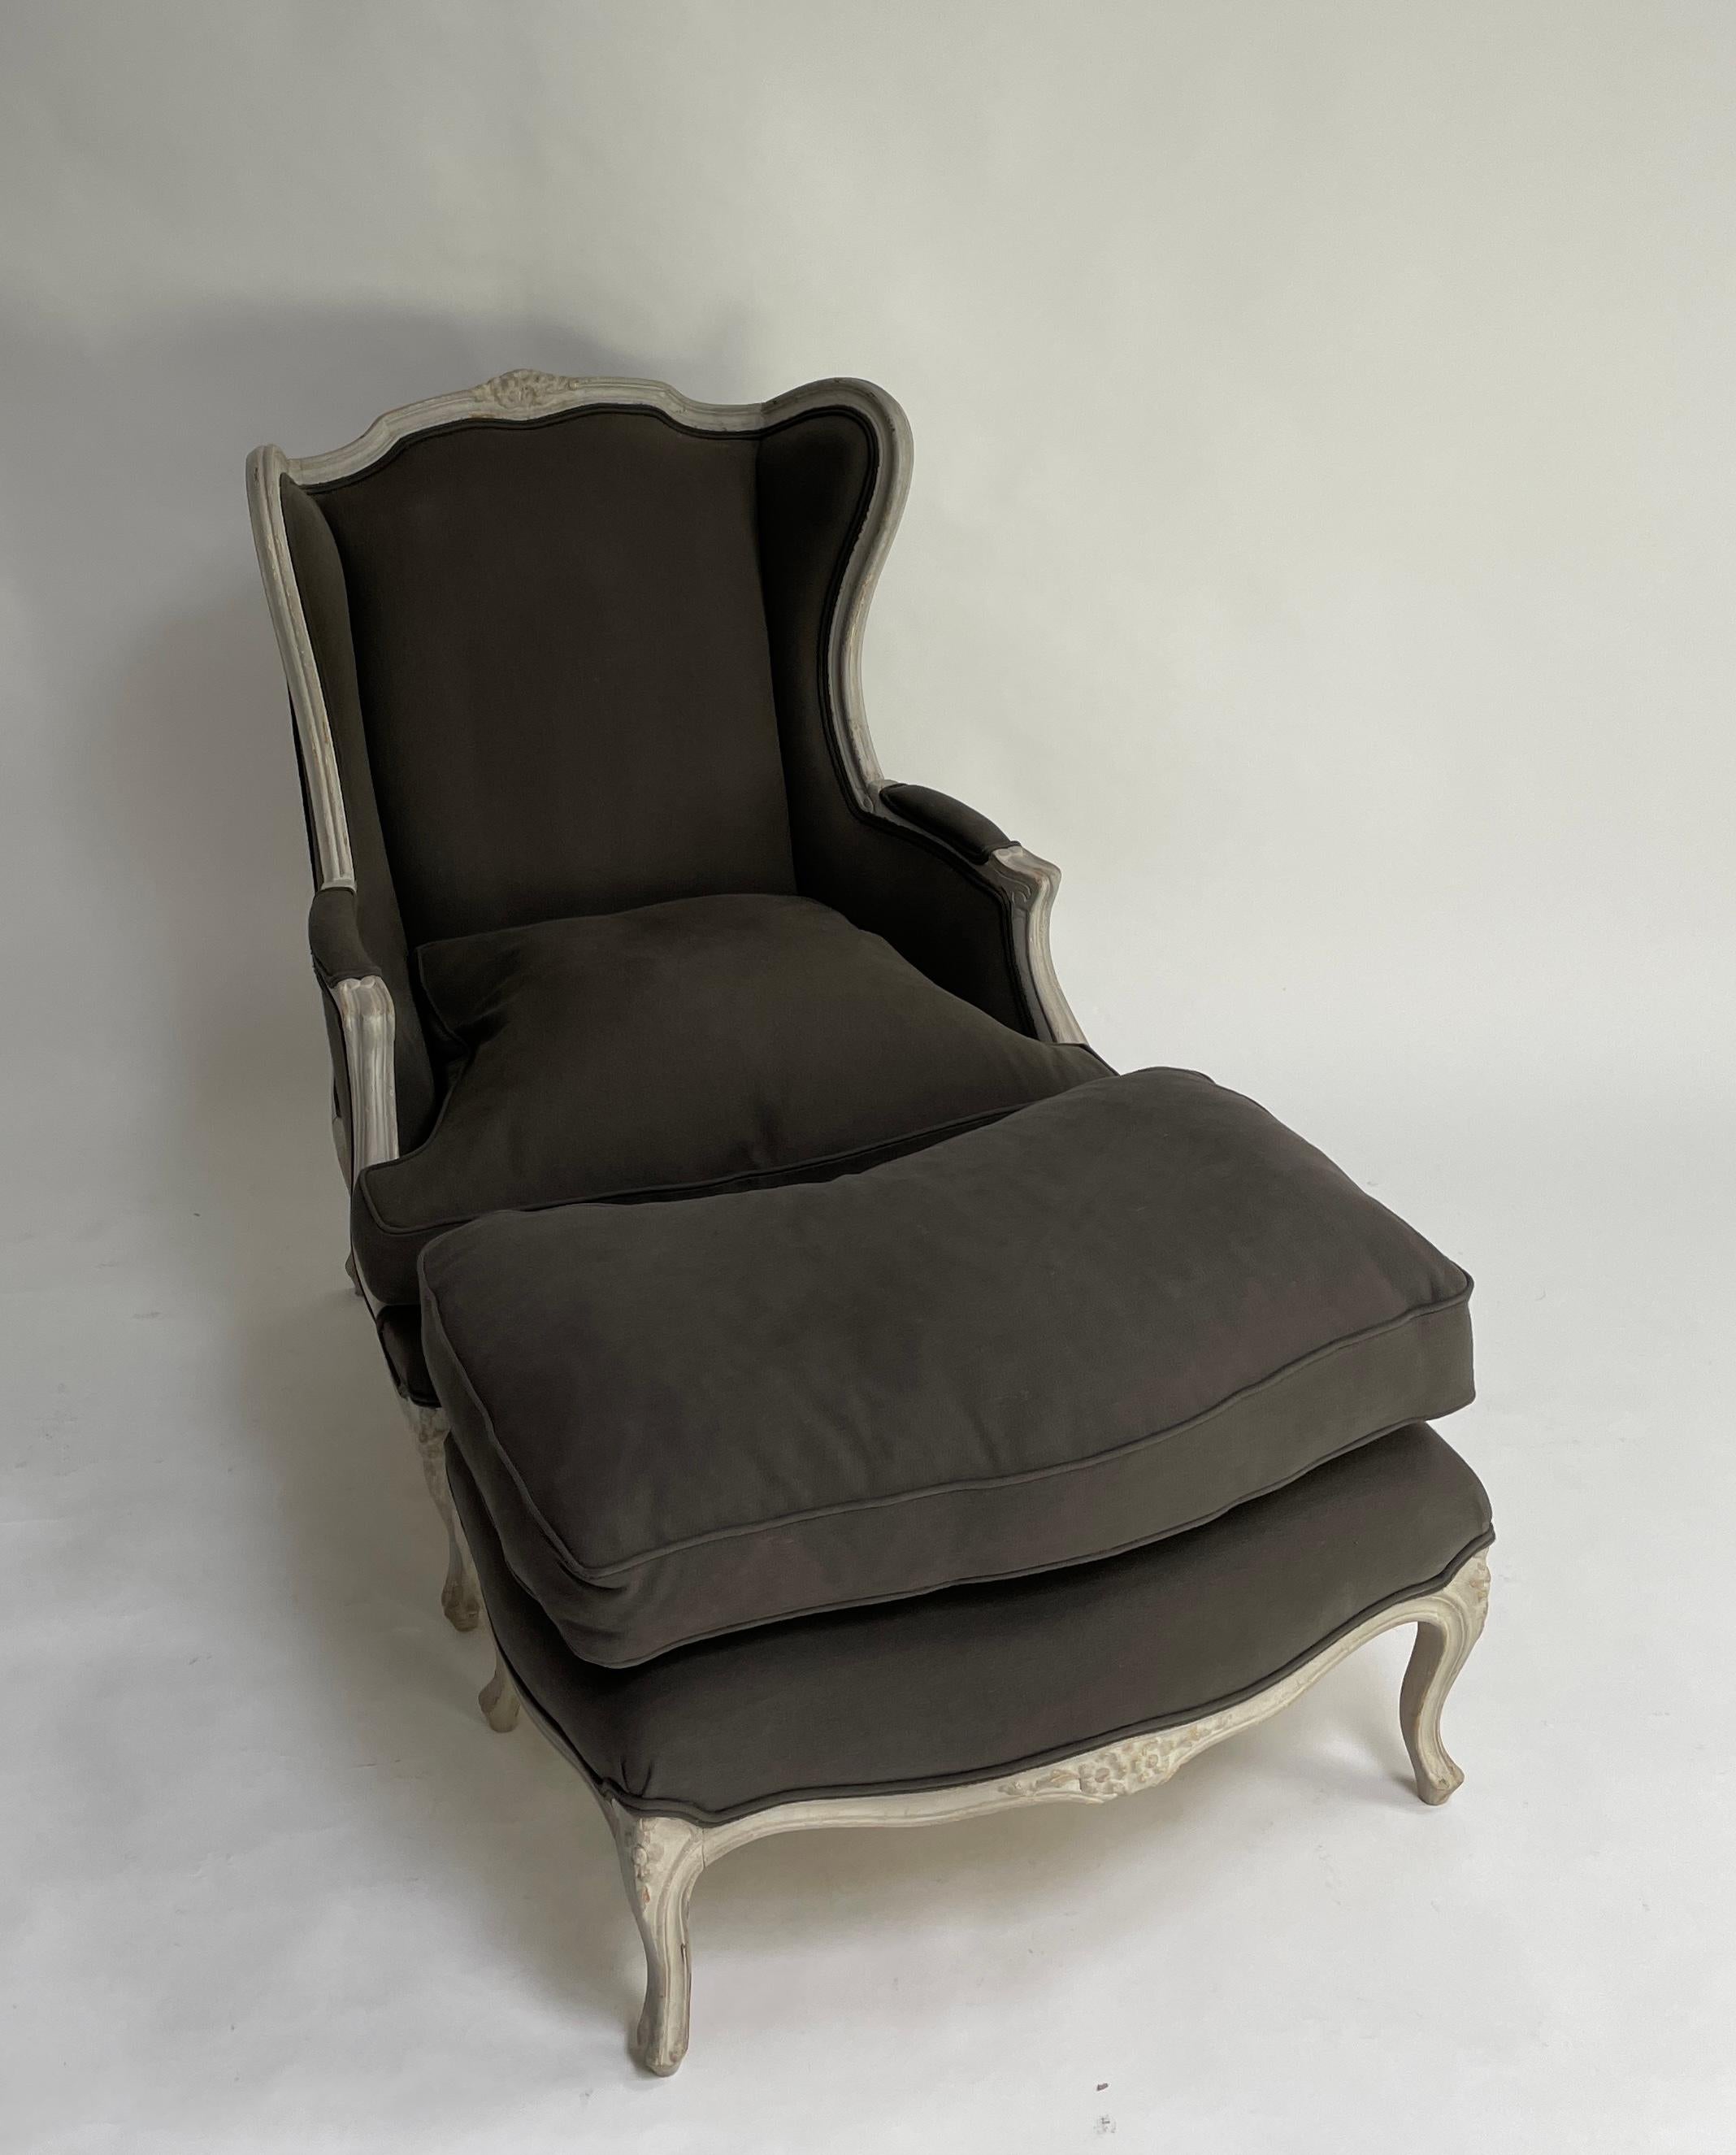 Gracious Louis XVI style arm chair with ottoman. New linen upholstery with down cushions.